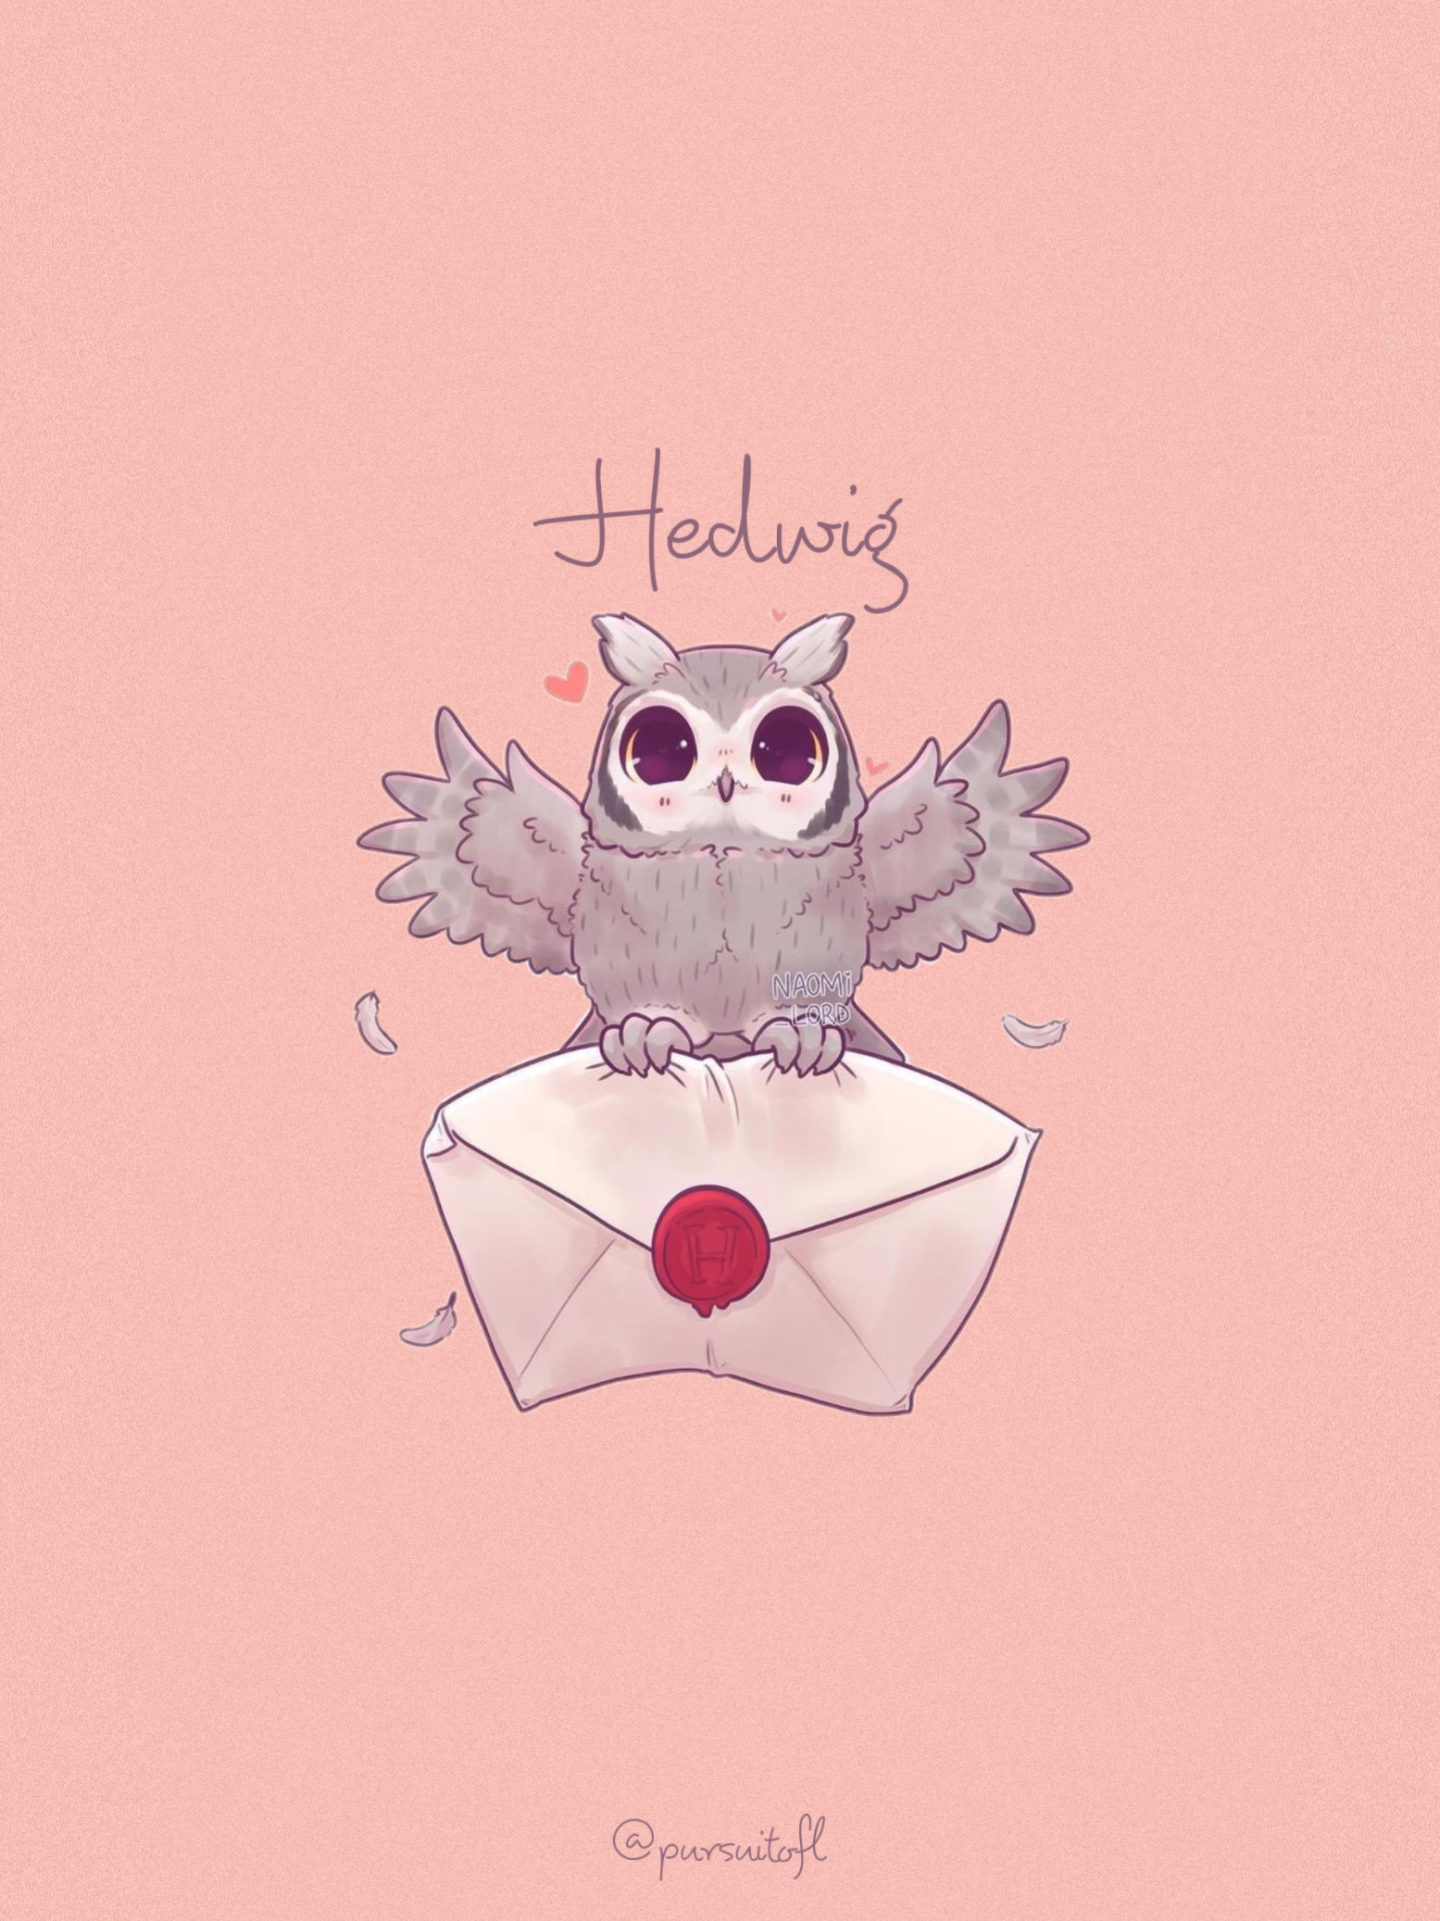 Pink tablet wallpaper with Hedwig from Harry Potter holding a Hogwarts envelope and Hedwig text